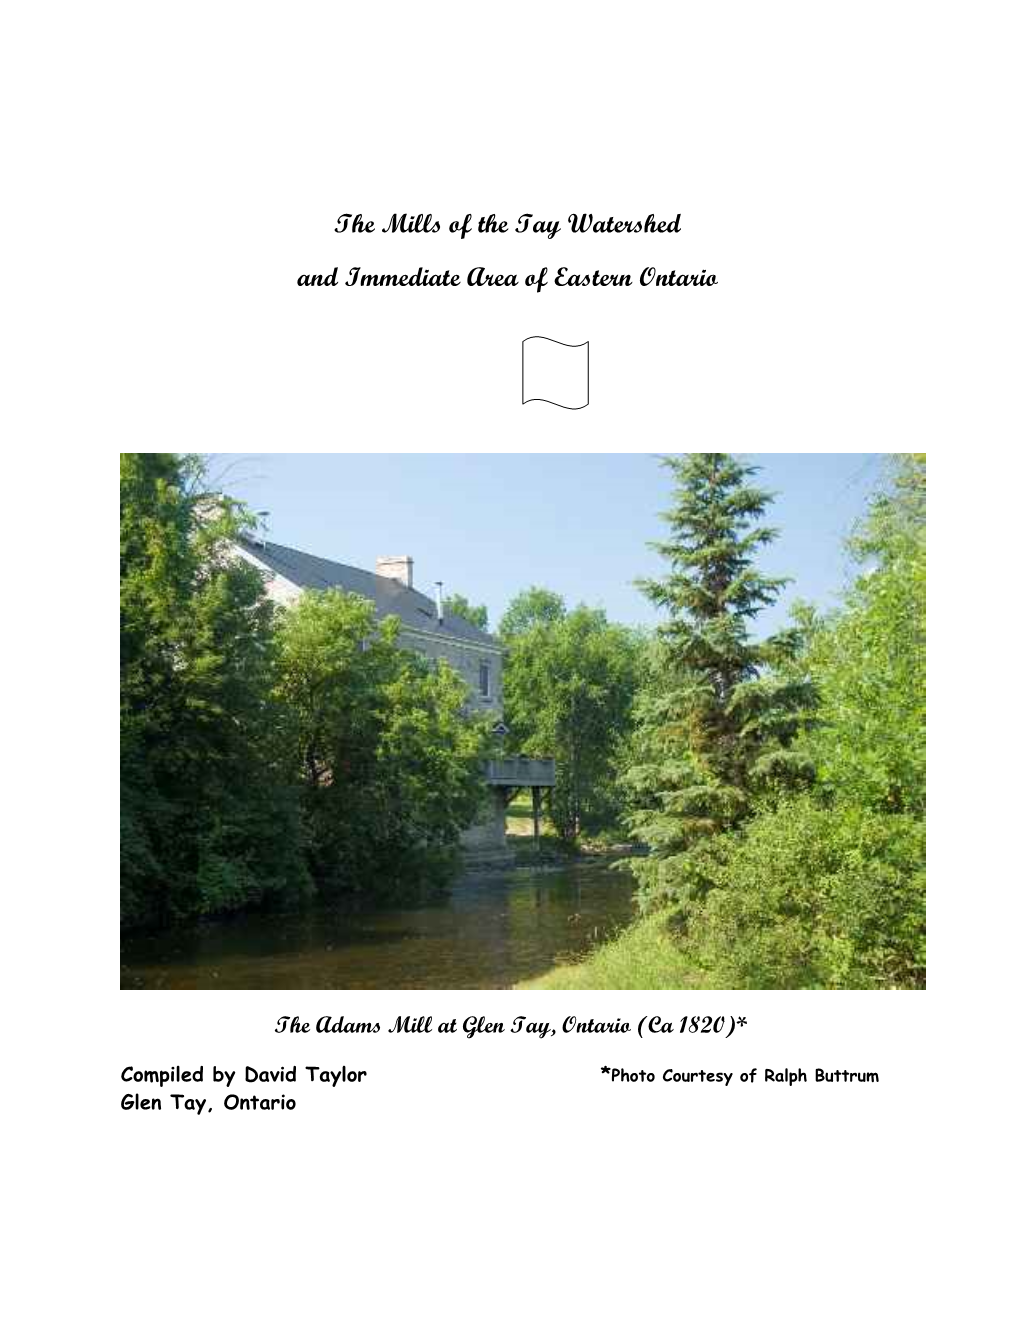 “The Mills of the Tay Watershed & Local Area of Eastern Ontario”